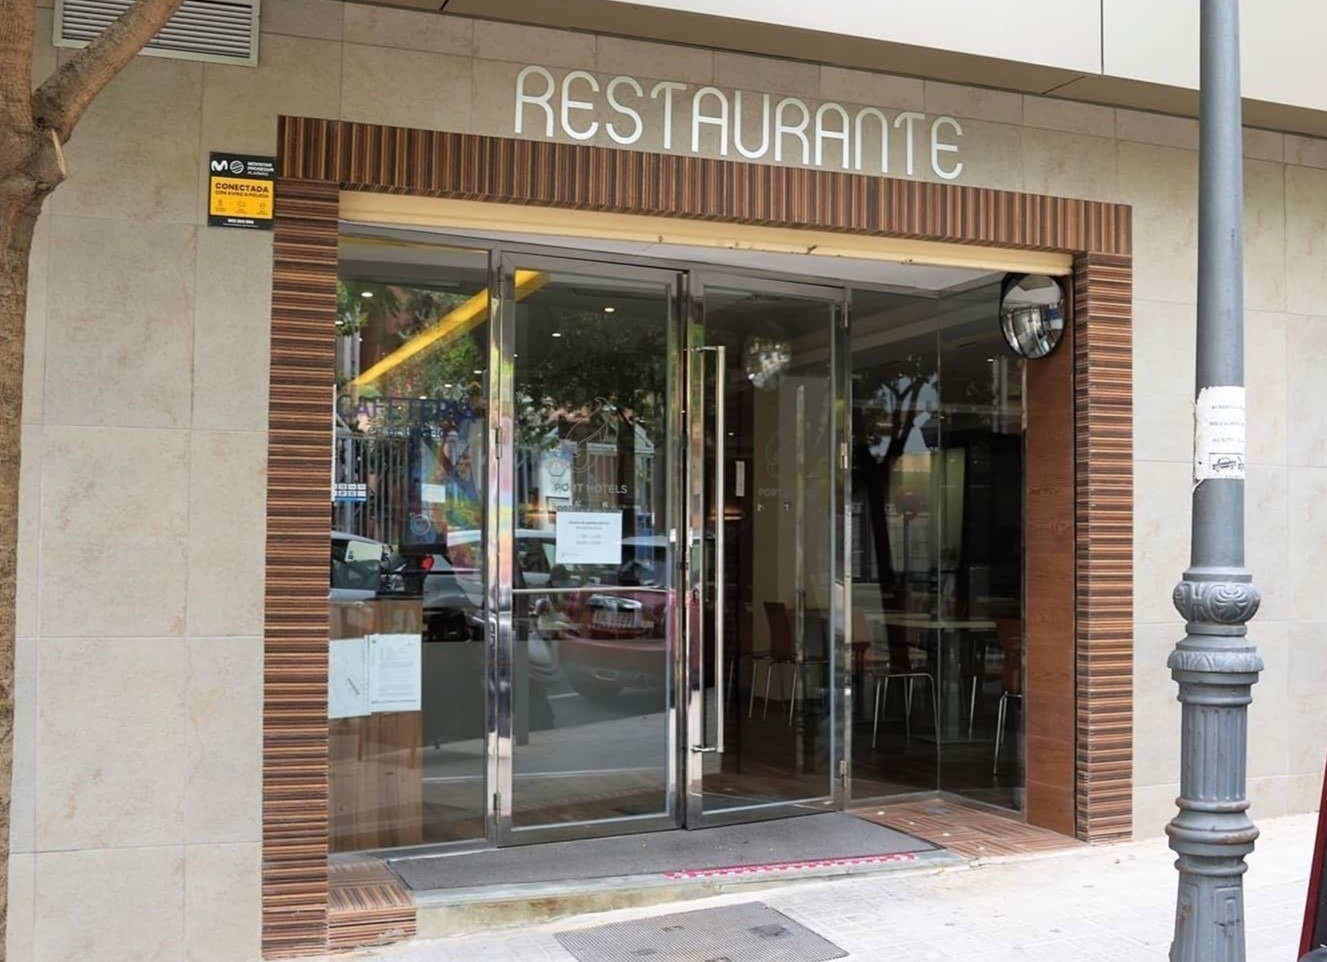 a restaurant with a sign that says restaurante on it